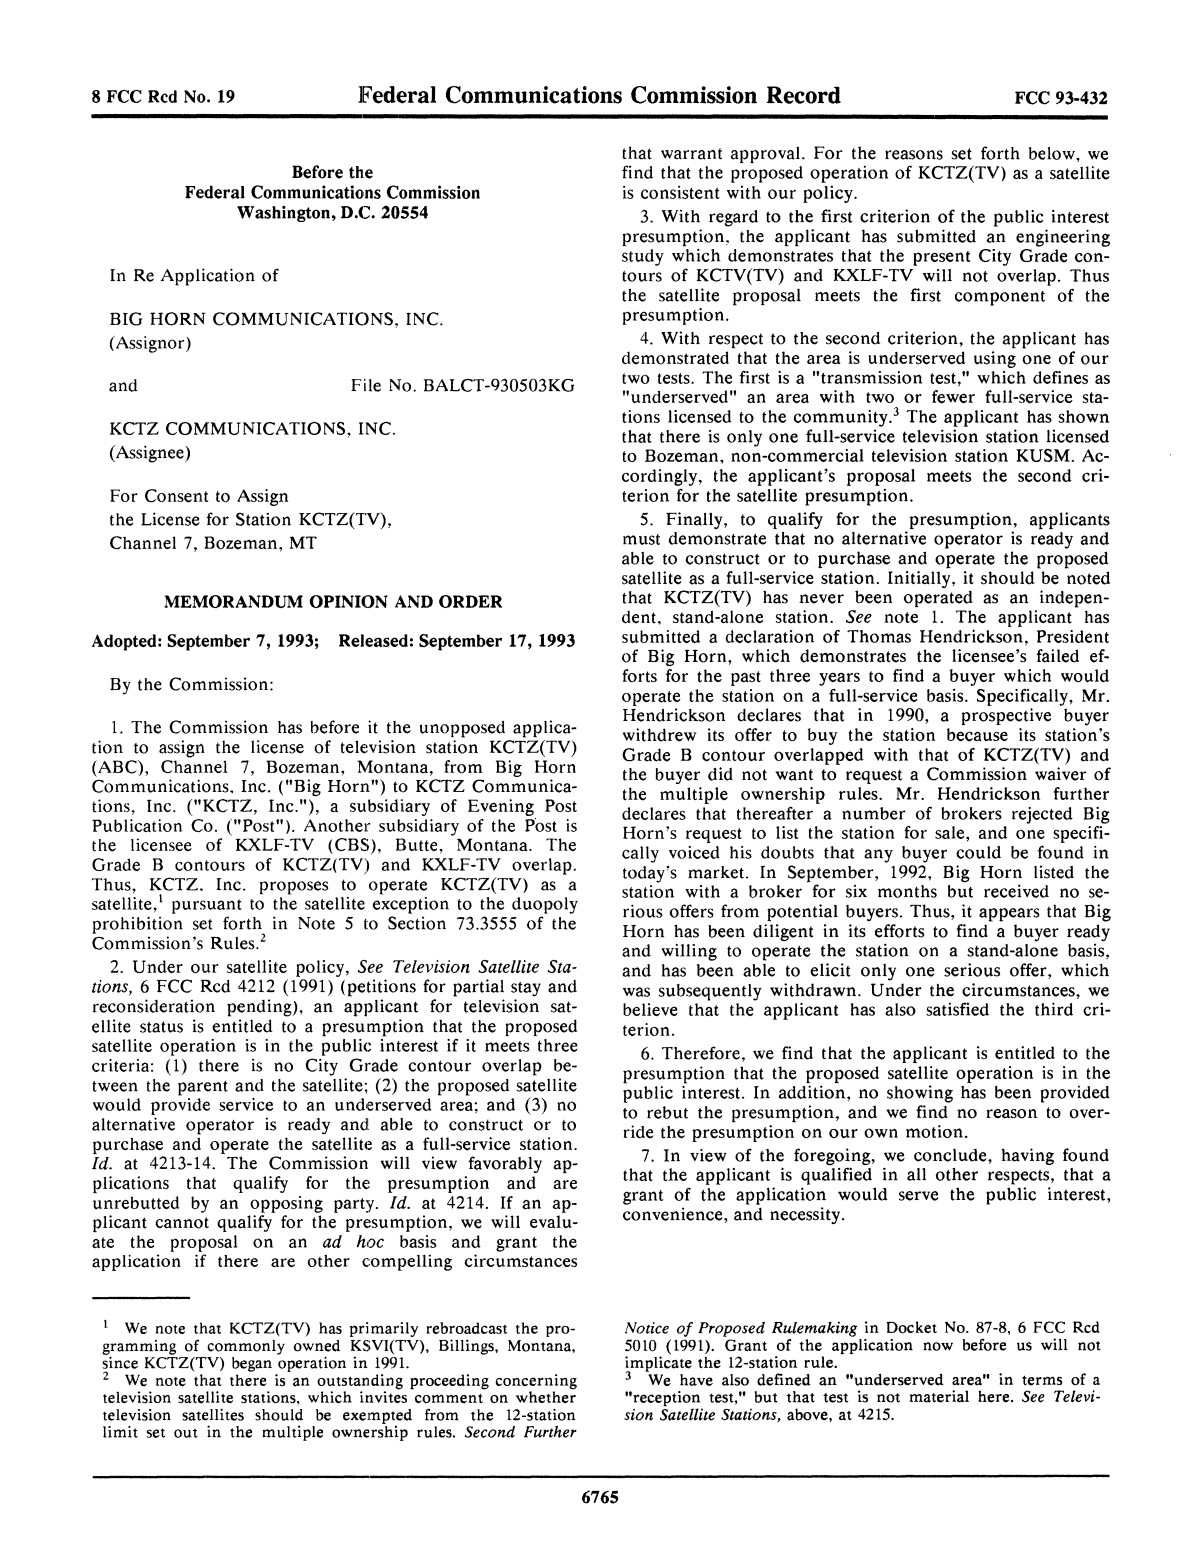 FCC Record, Volume 8, No. 19, Pages 6621 to 6998, September 6 - September 17, 1993
                                                
                                                    6765
                                                